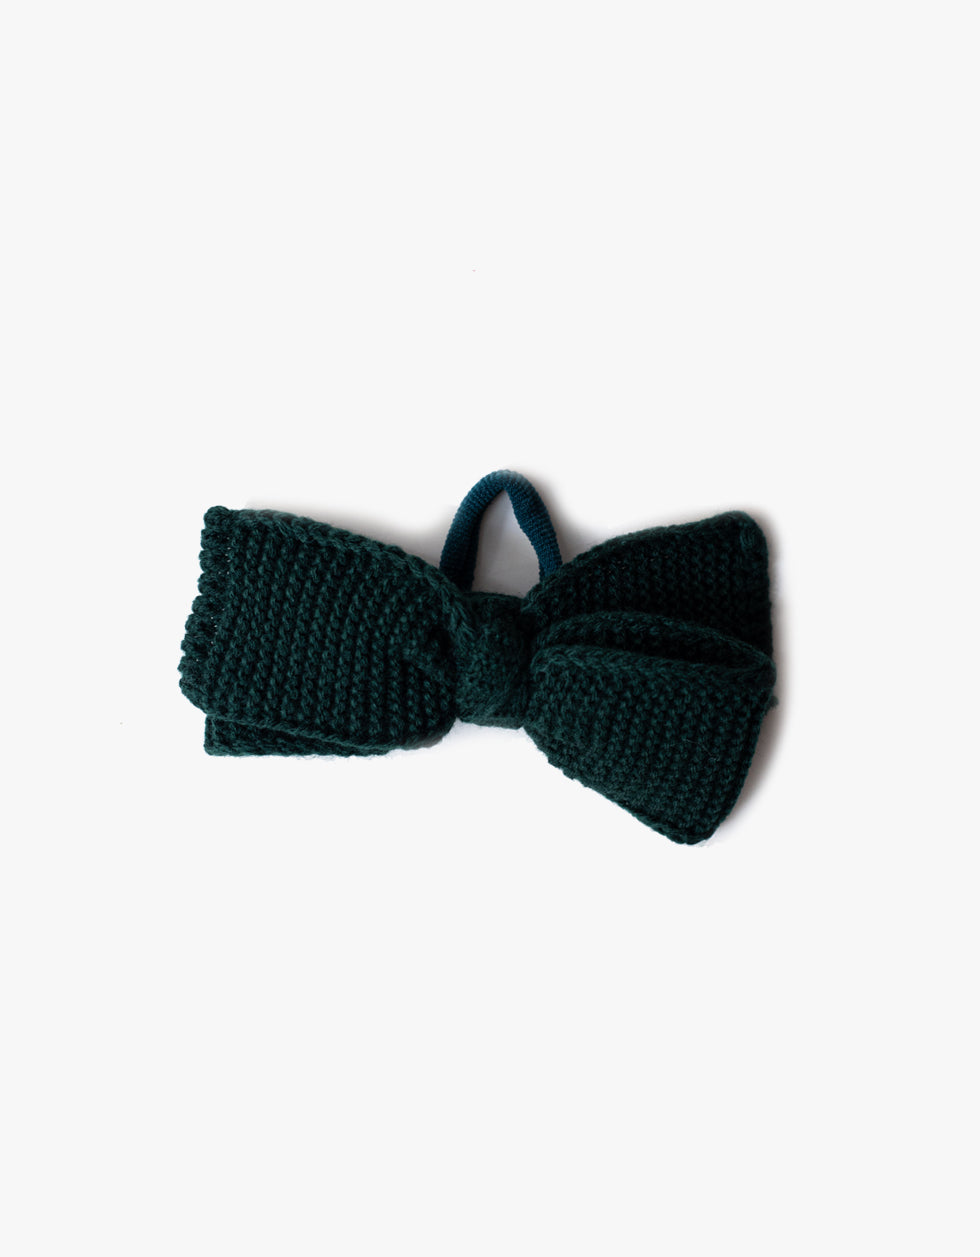 Scrunchie with large bow